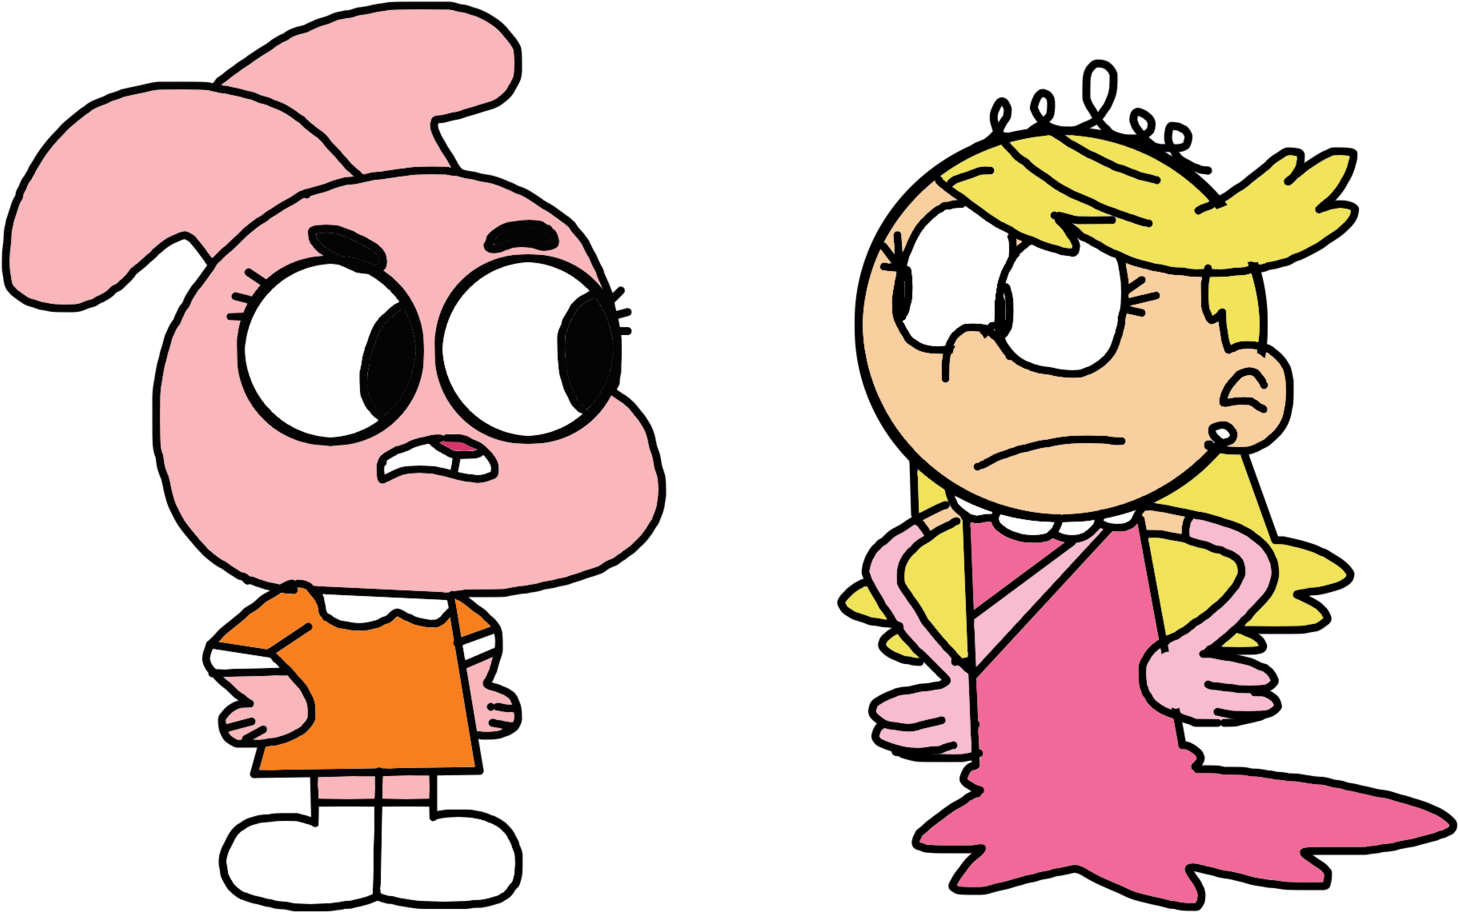 Anais Watterson Meets Lola Loud By Marcospower1996 - Anais Watterson And Lola Loud (1600x1600)